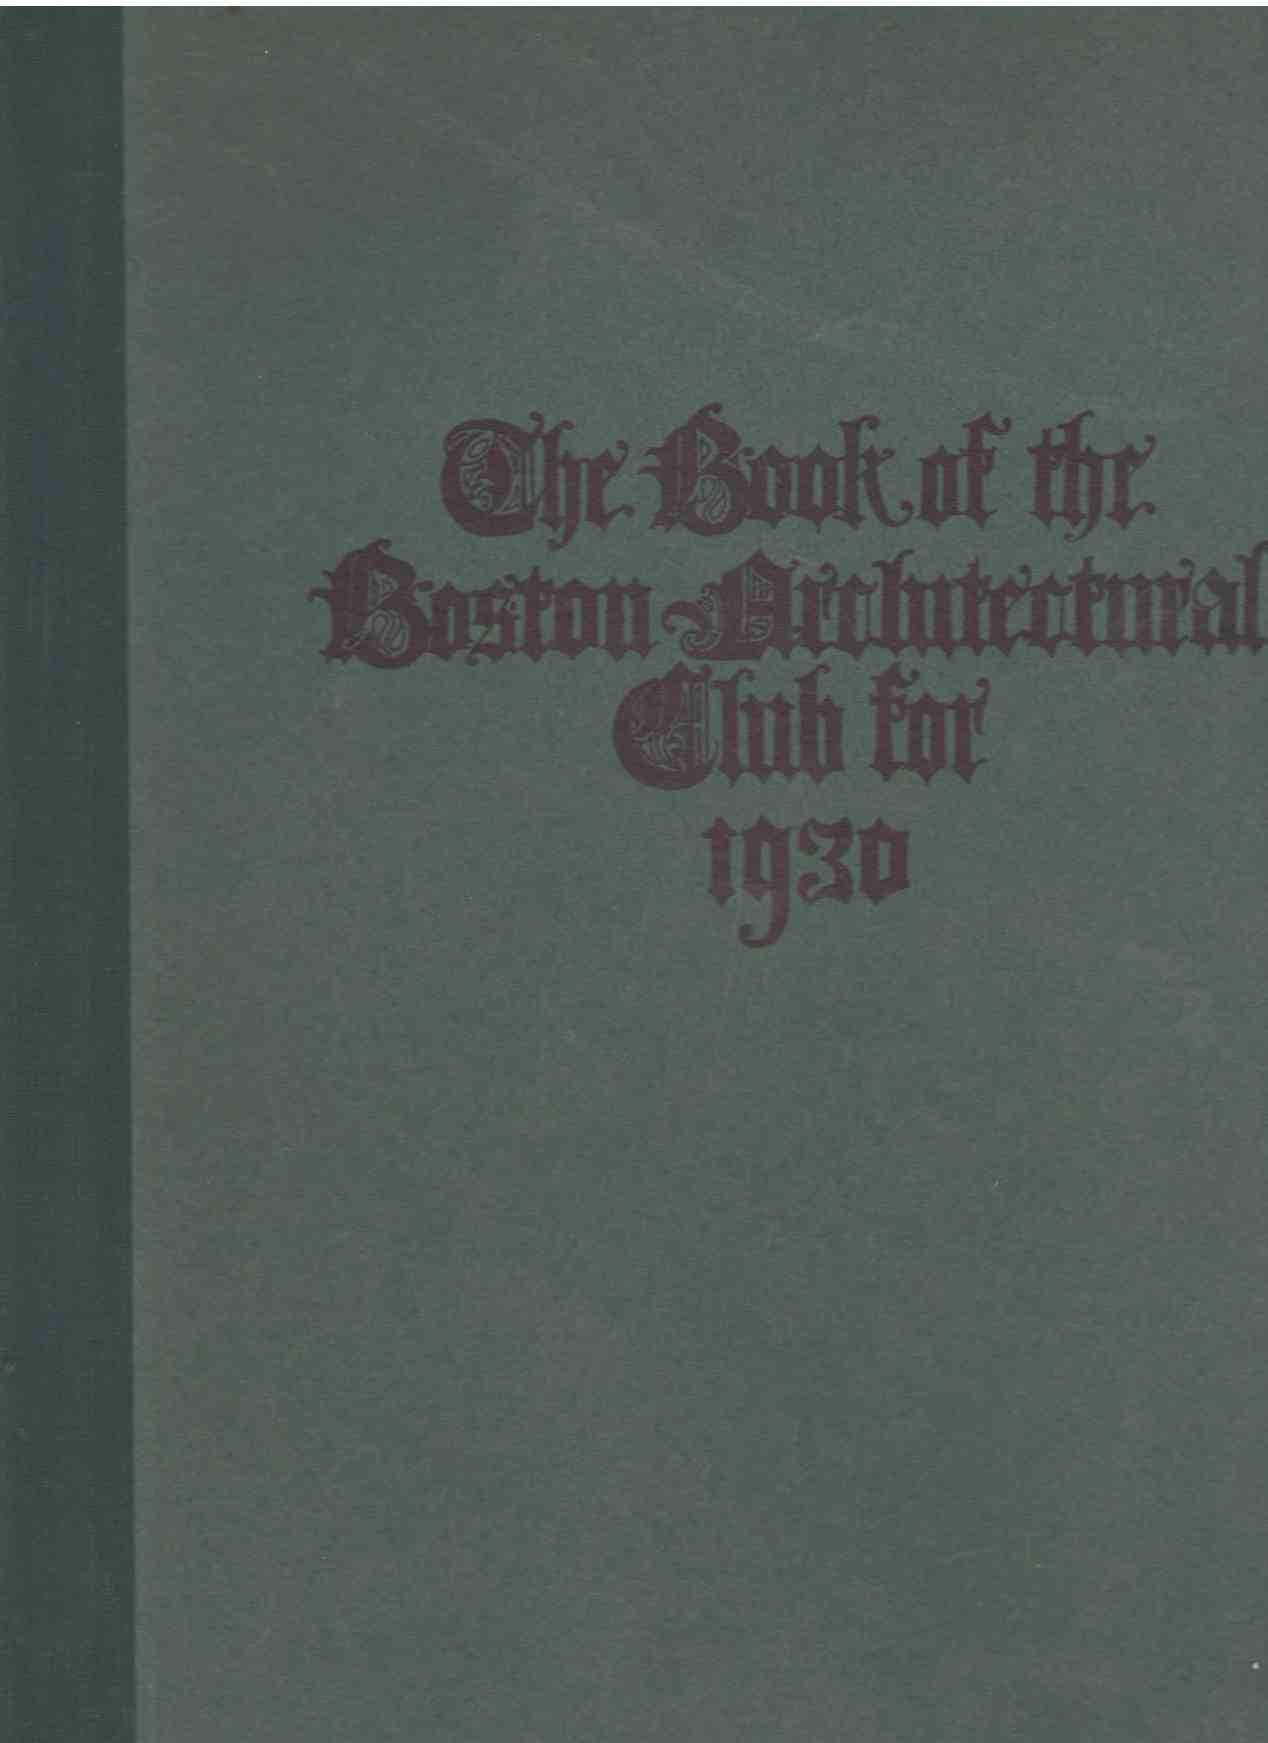 The Book of the Boston Architectural Club for 1930: Containing Examples of  Metal Work - books-new